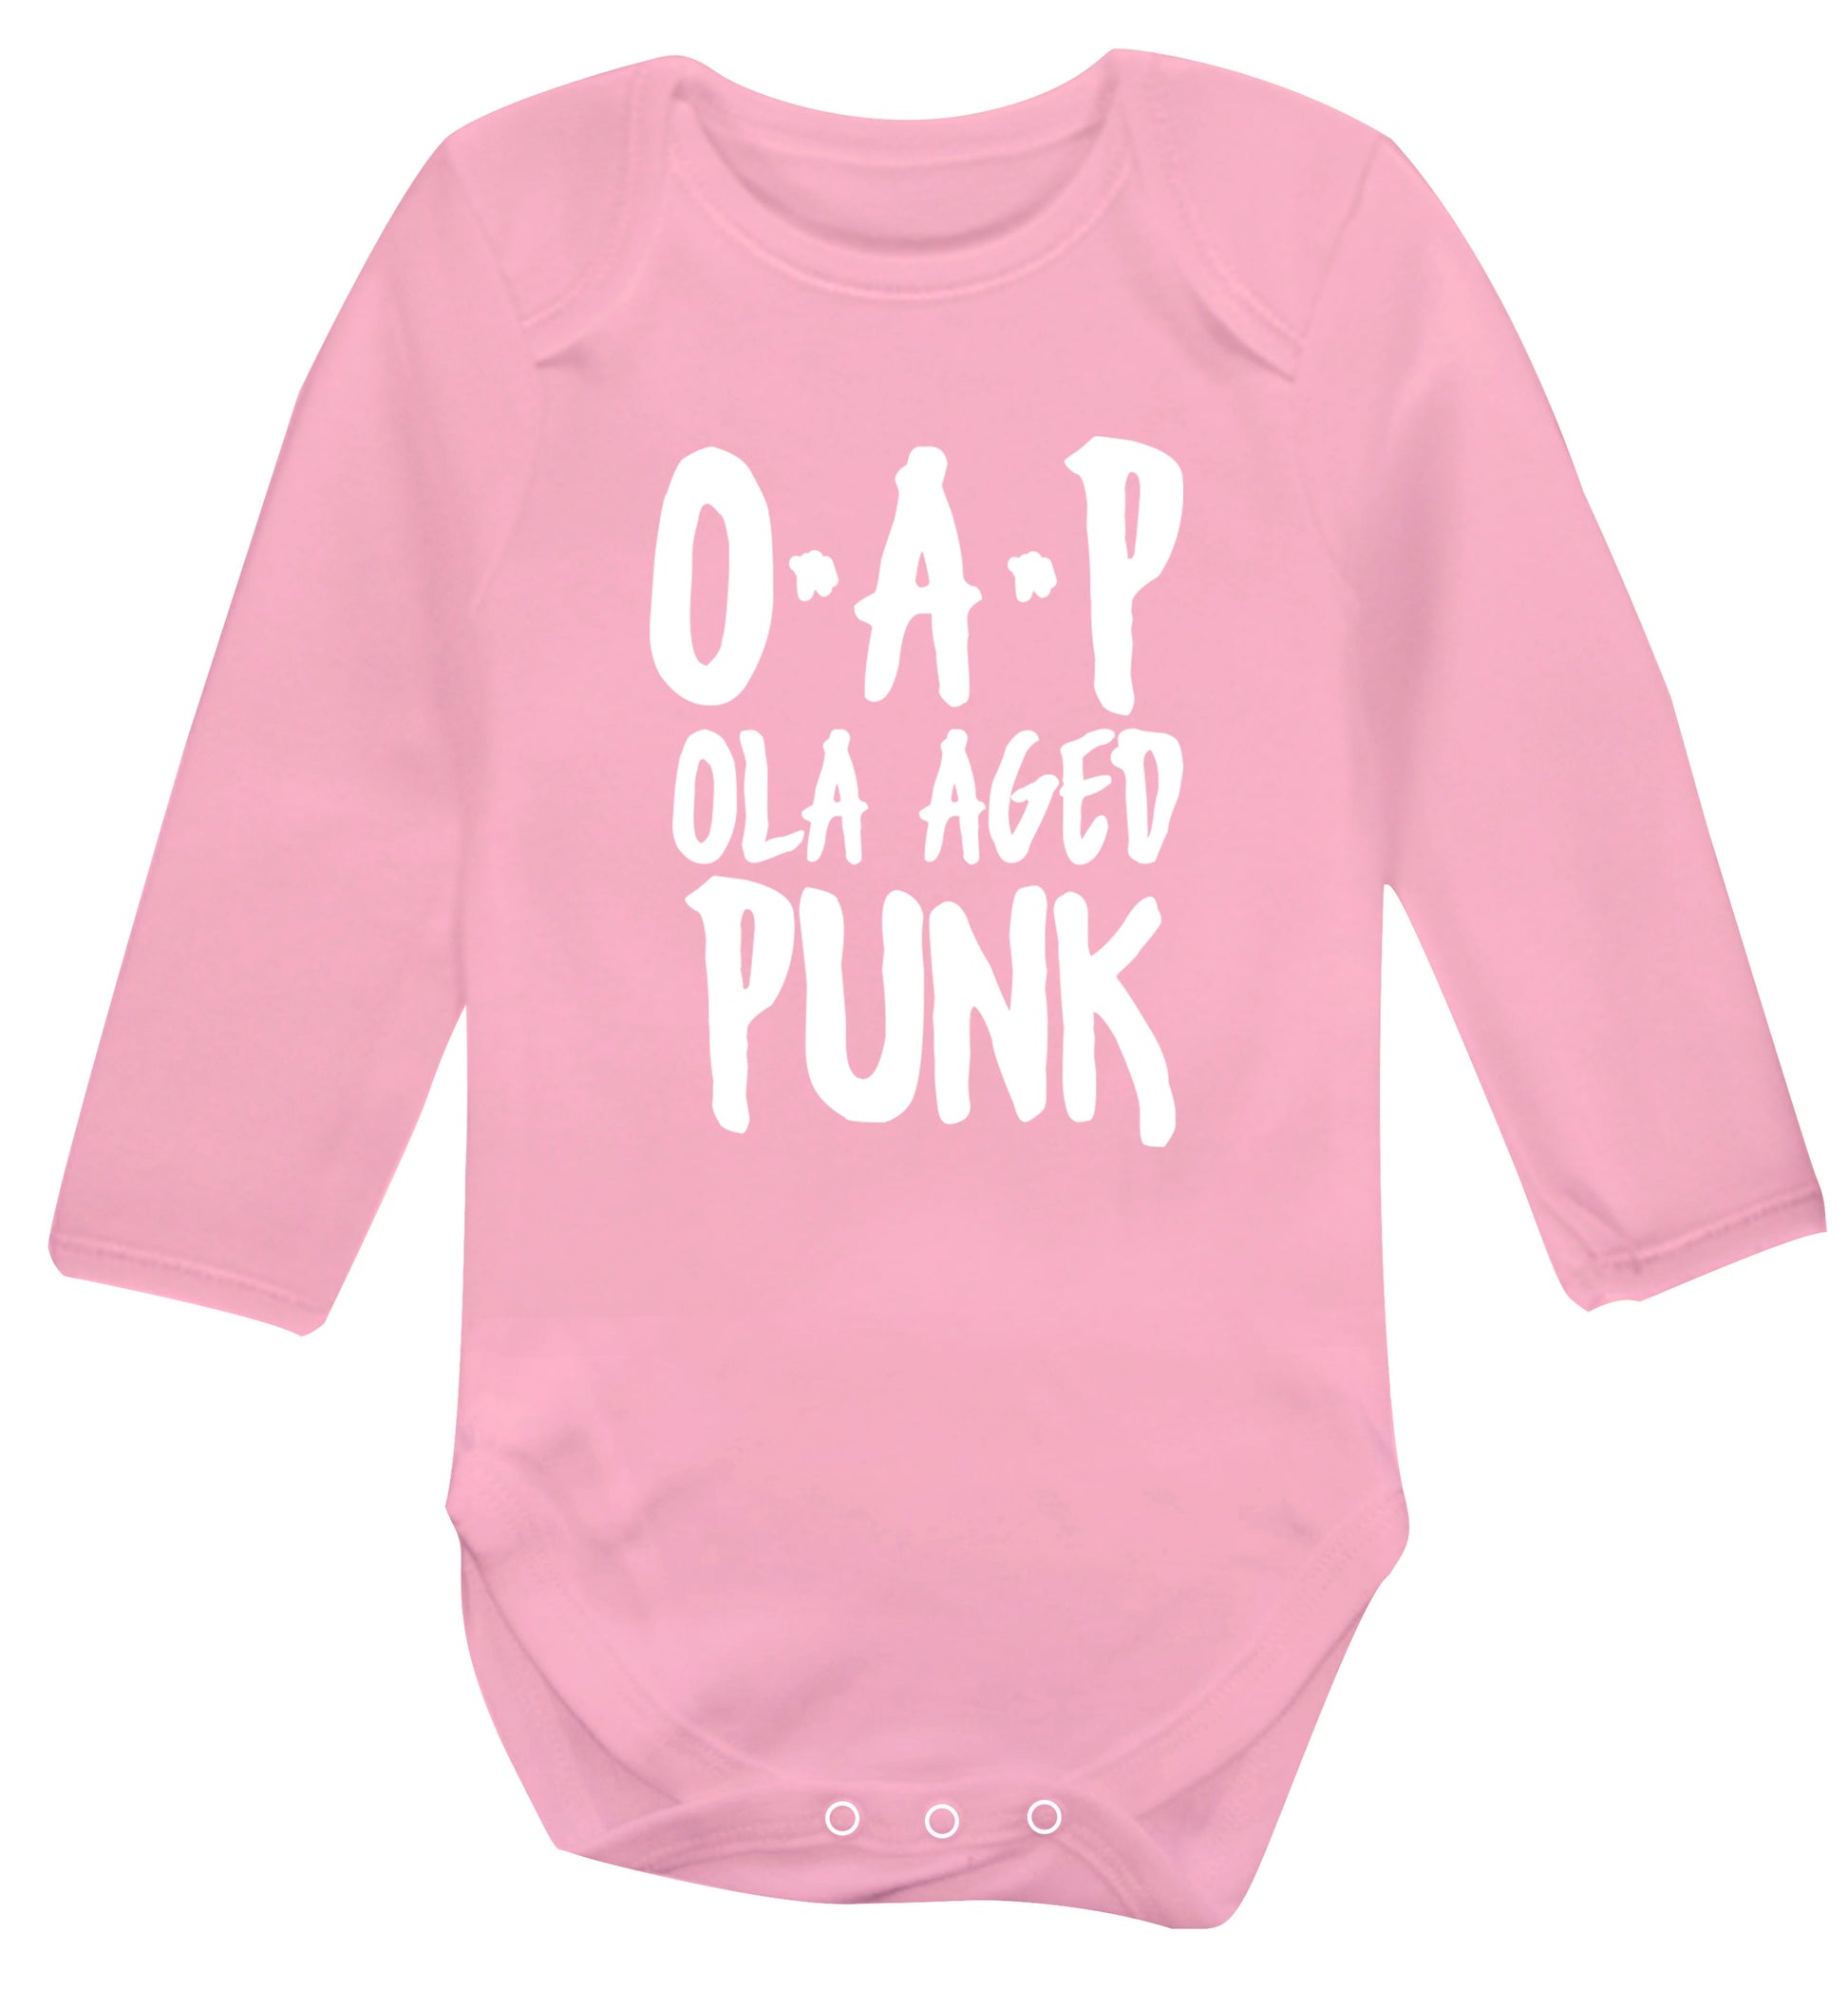 O.A.P Old Aged Punk Baby Vest long sleeved pale pink 6-12 months